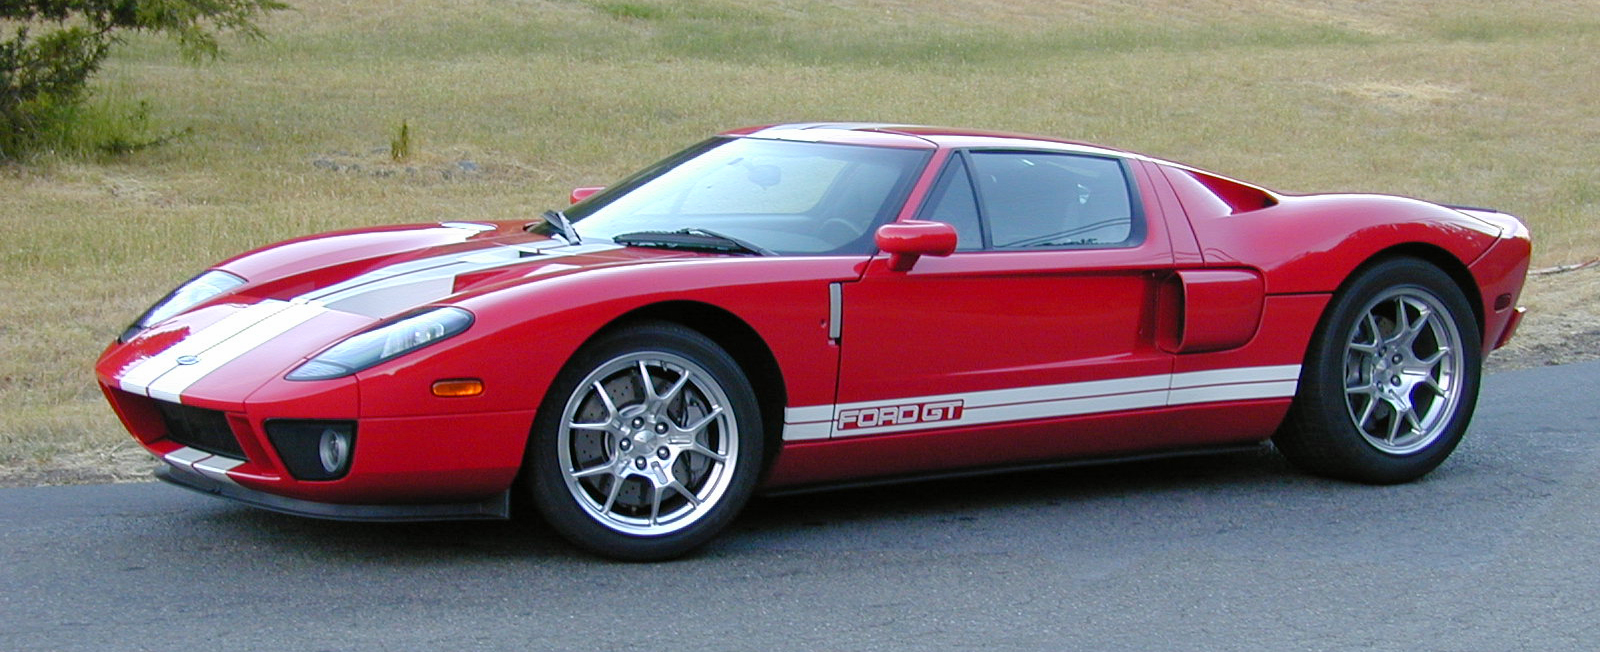 2005 Ford GT Early Test Car